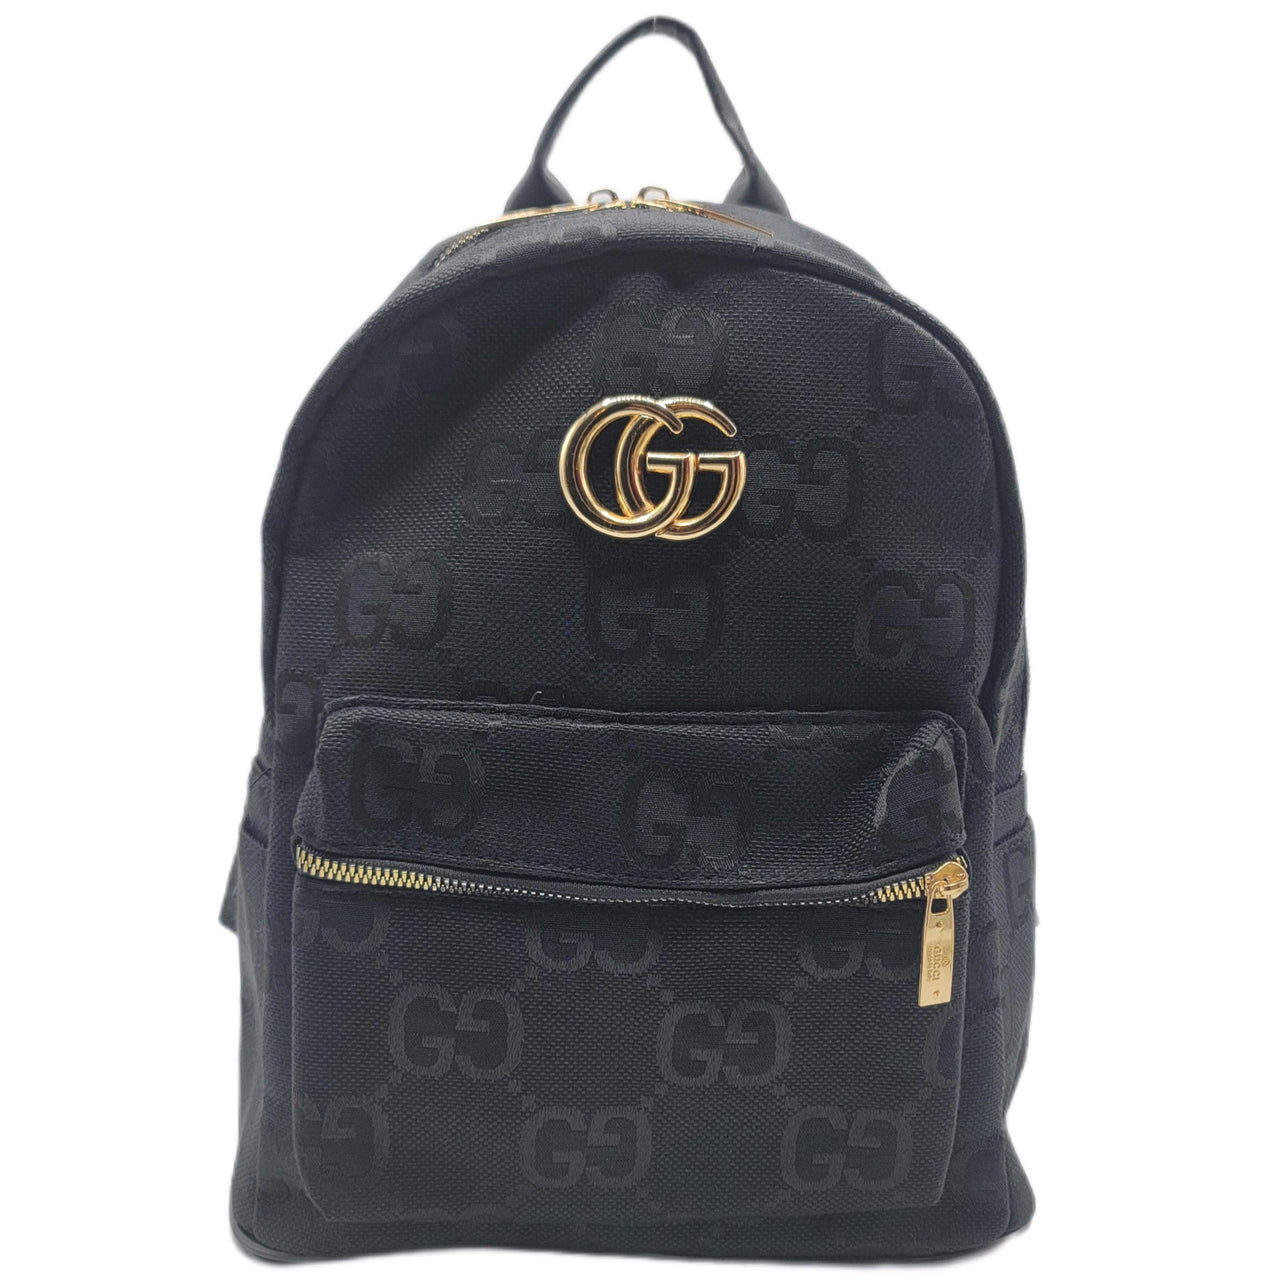 The Bag Couture Handbags, Wallets & Cases Gucci Ladies Backpack 3